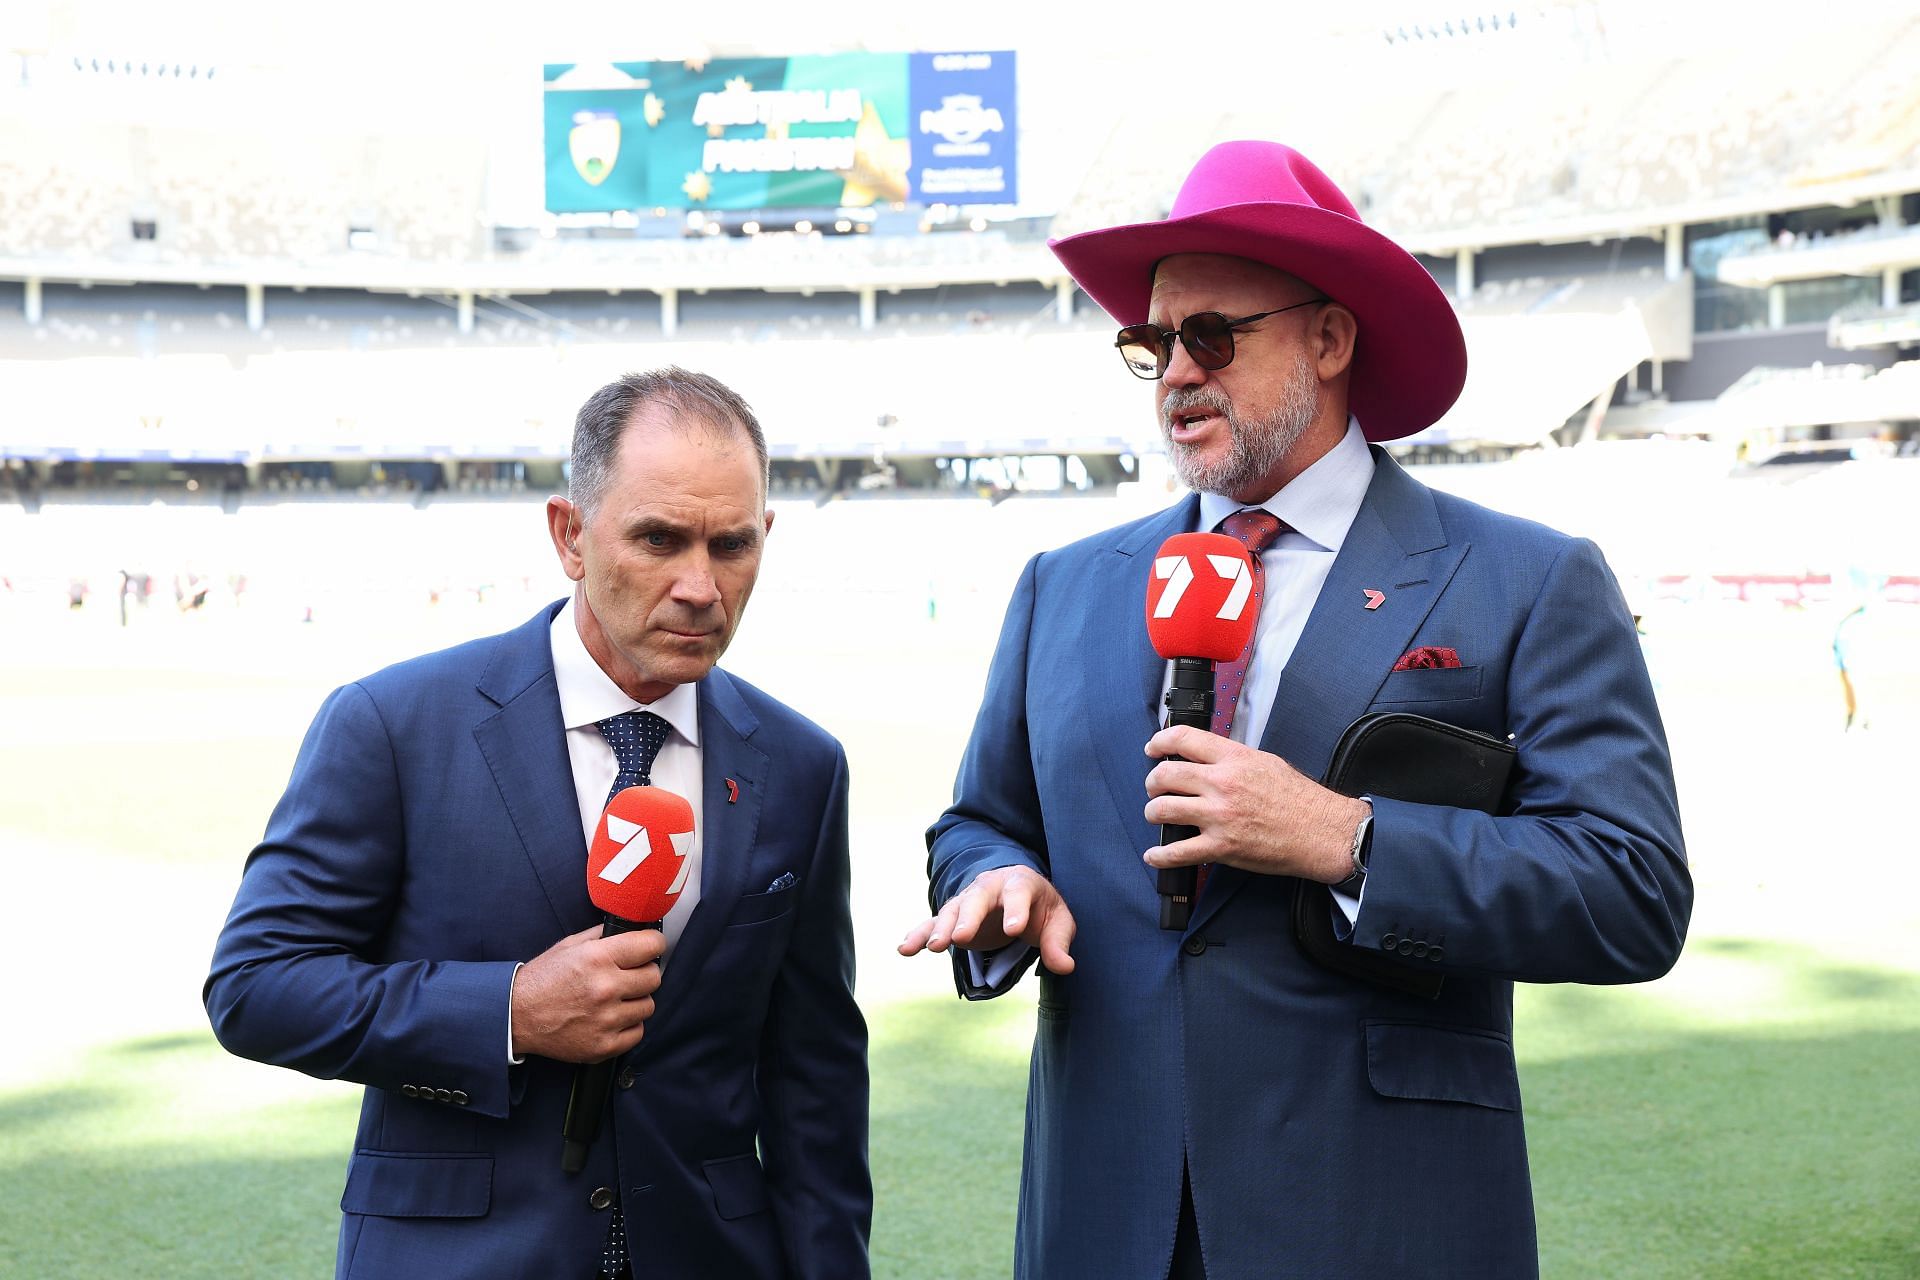 Matthew Hayden (right) does not like the idea of Smith opening.